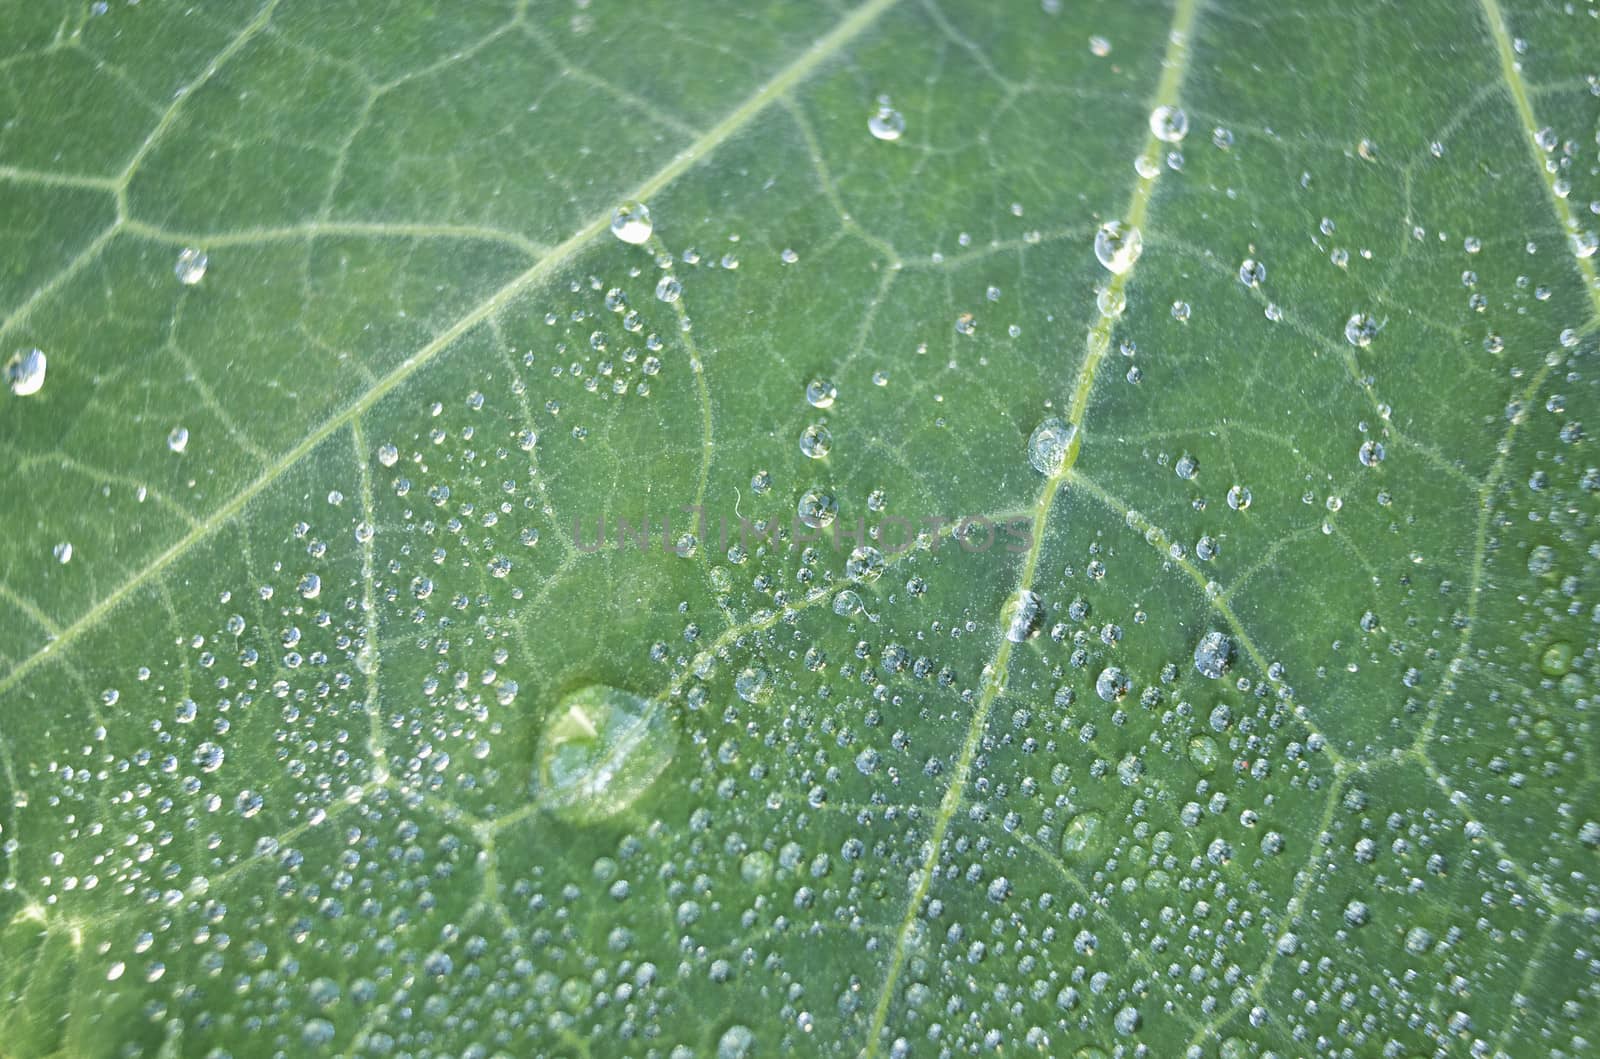 Leaf of a plant covered with dew close-up